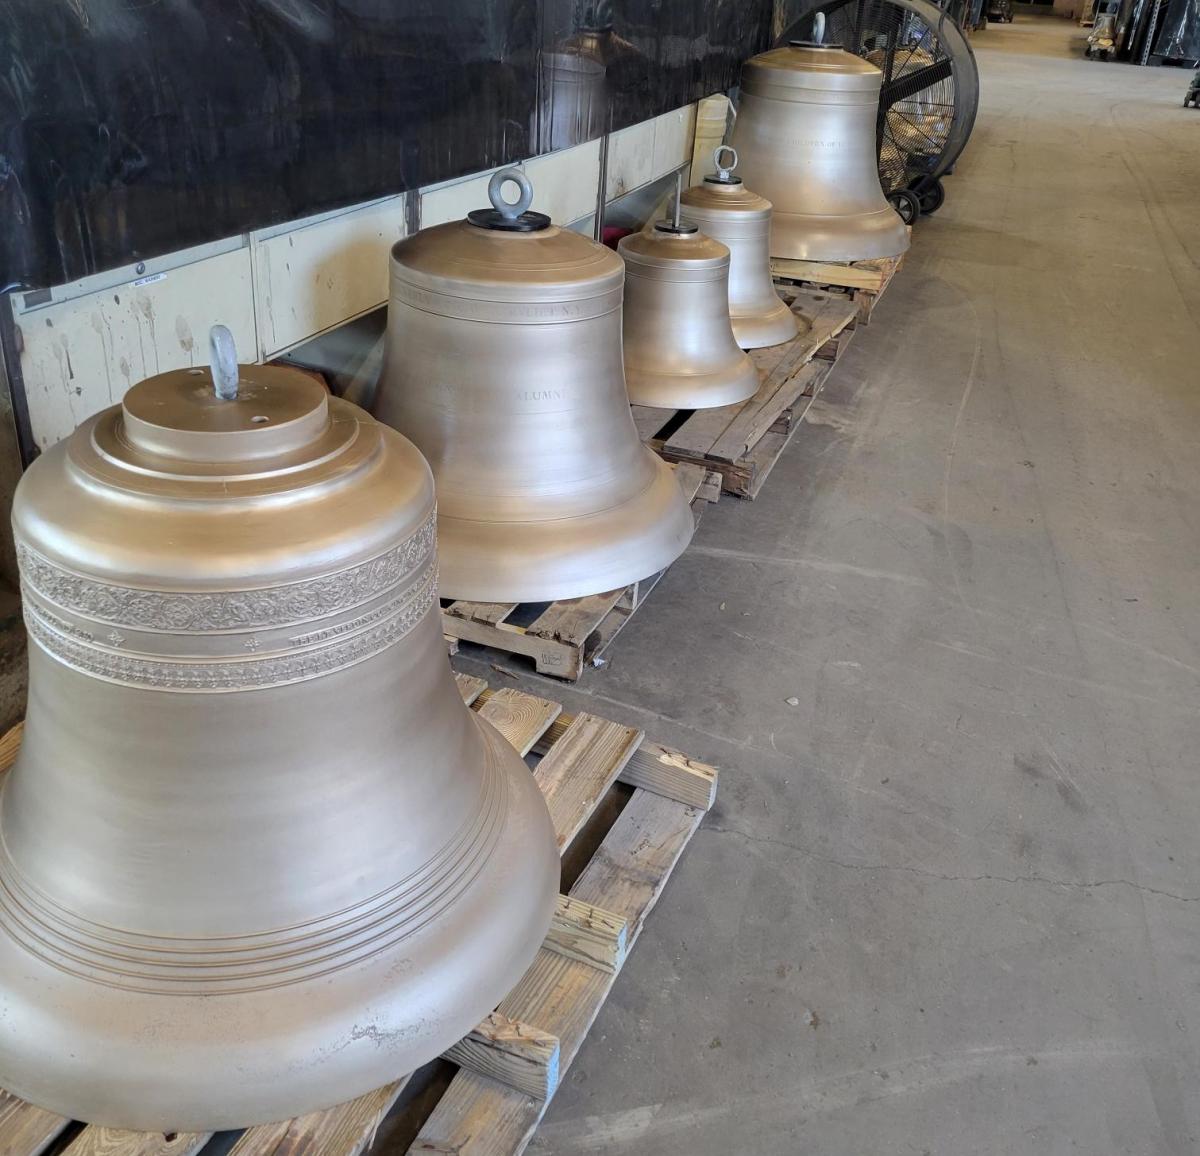 Carillon bells on wooden palettes